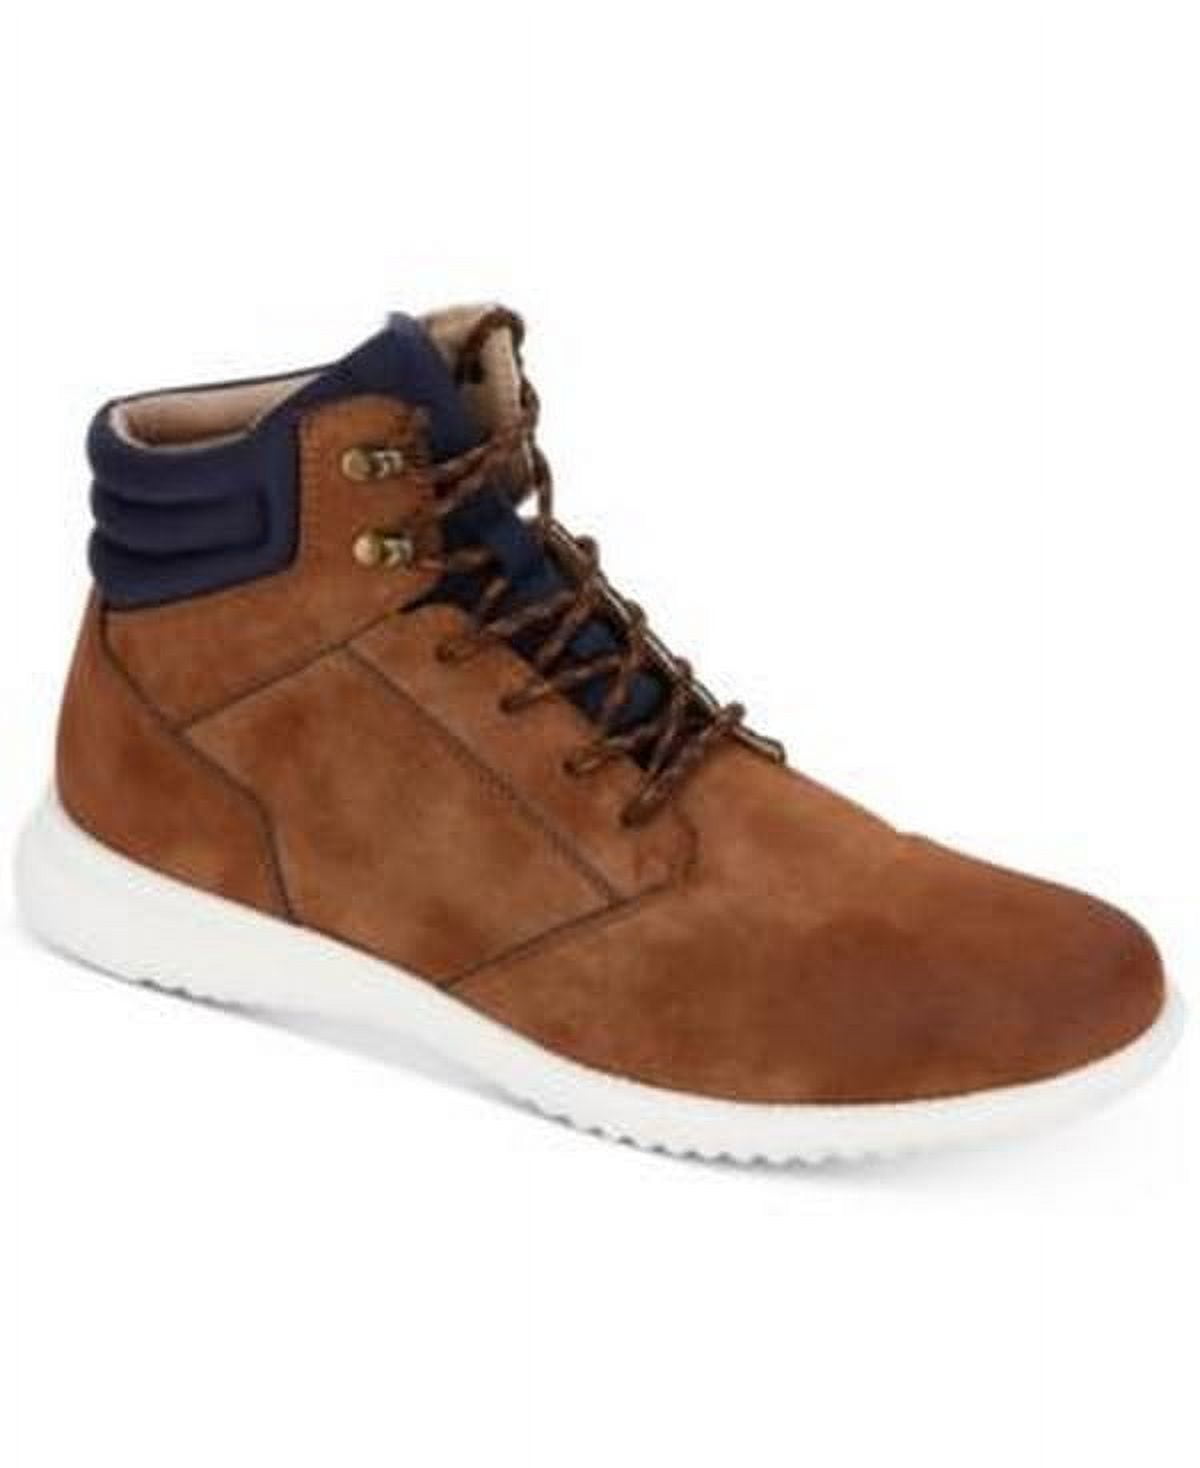 Kenneth Cole Hiking Boots & Shoes in Shoes - Walmart.com